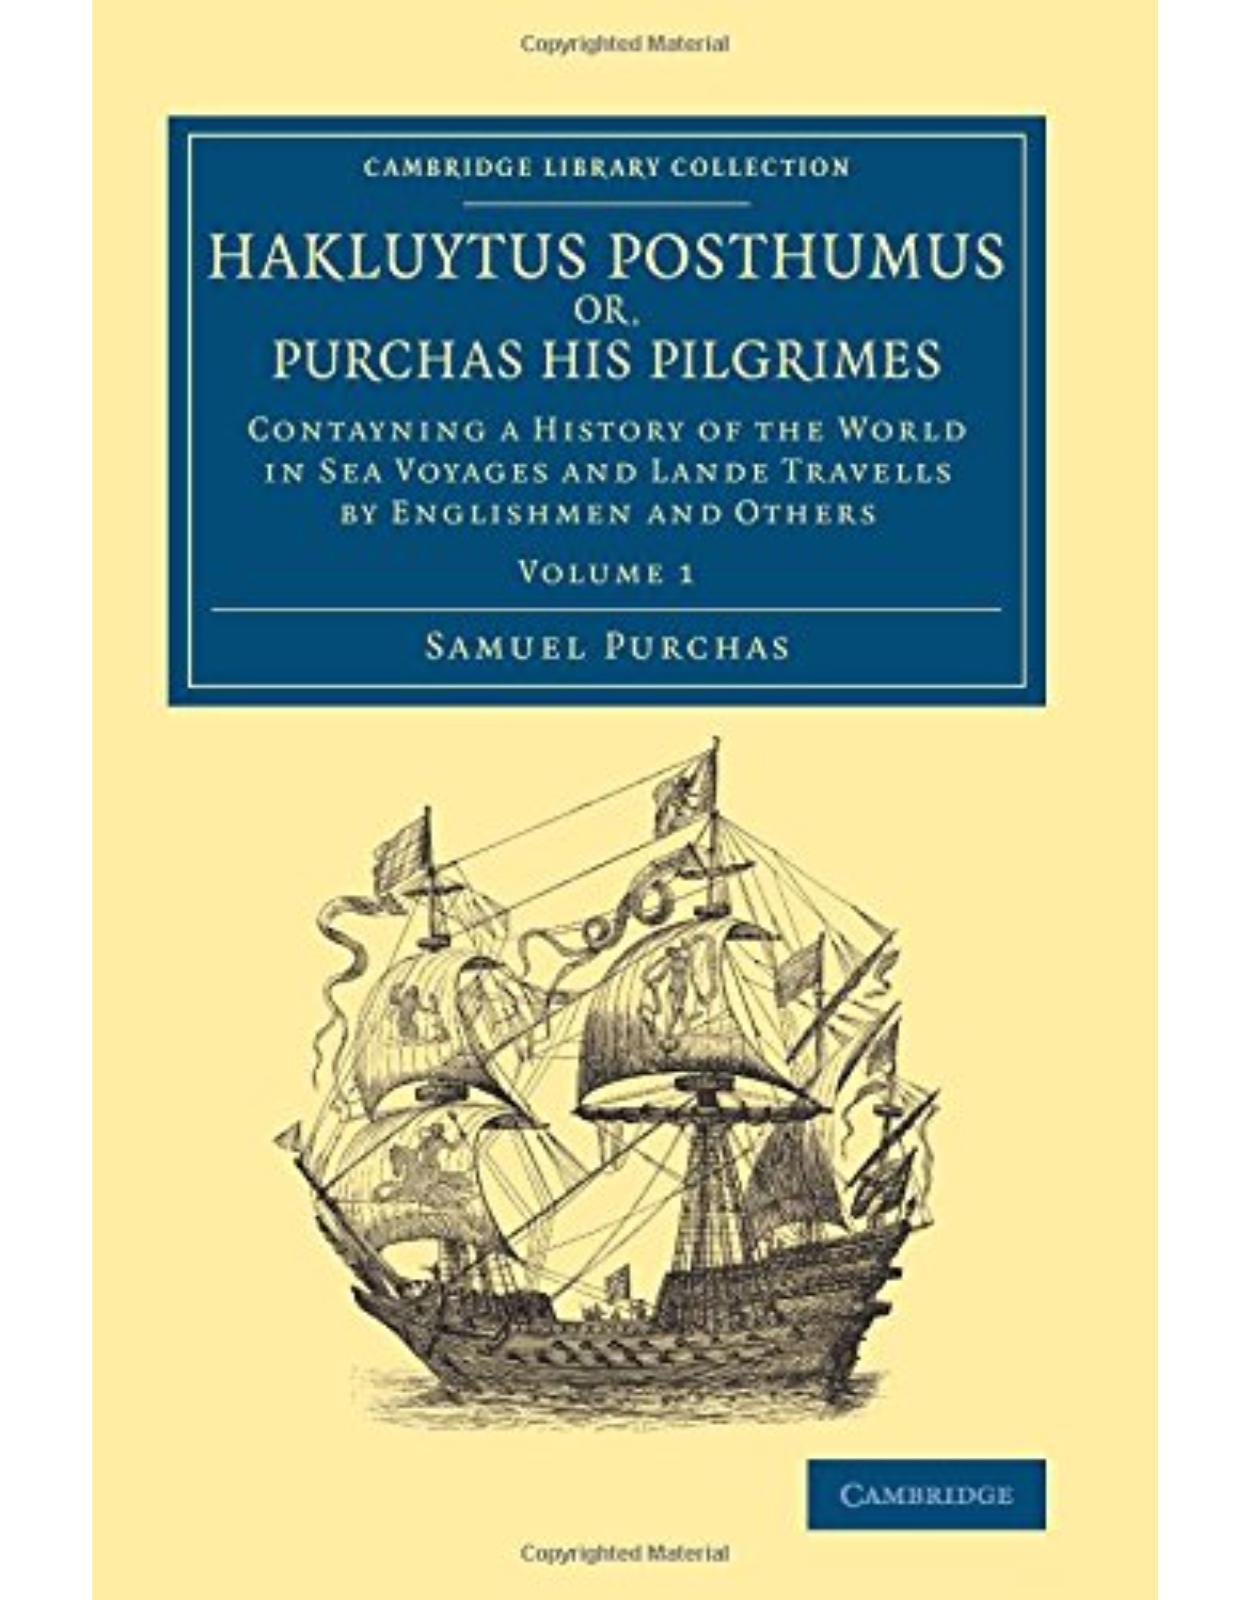 Hakluytus Posthumus or, Purchas his Pilgrimes: Contayning a History of the World in Sea Voyages and Lande Travells by Englishmen and Others (Volume 1)